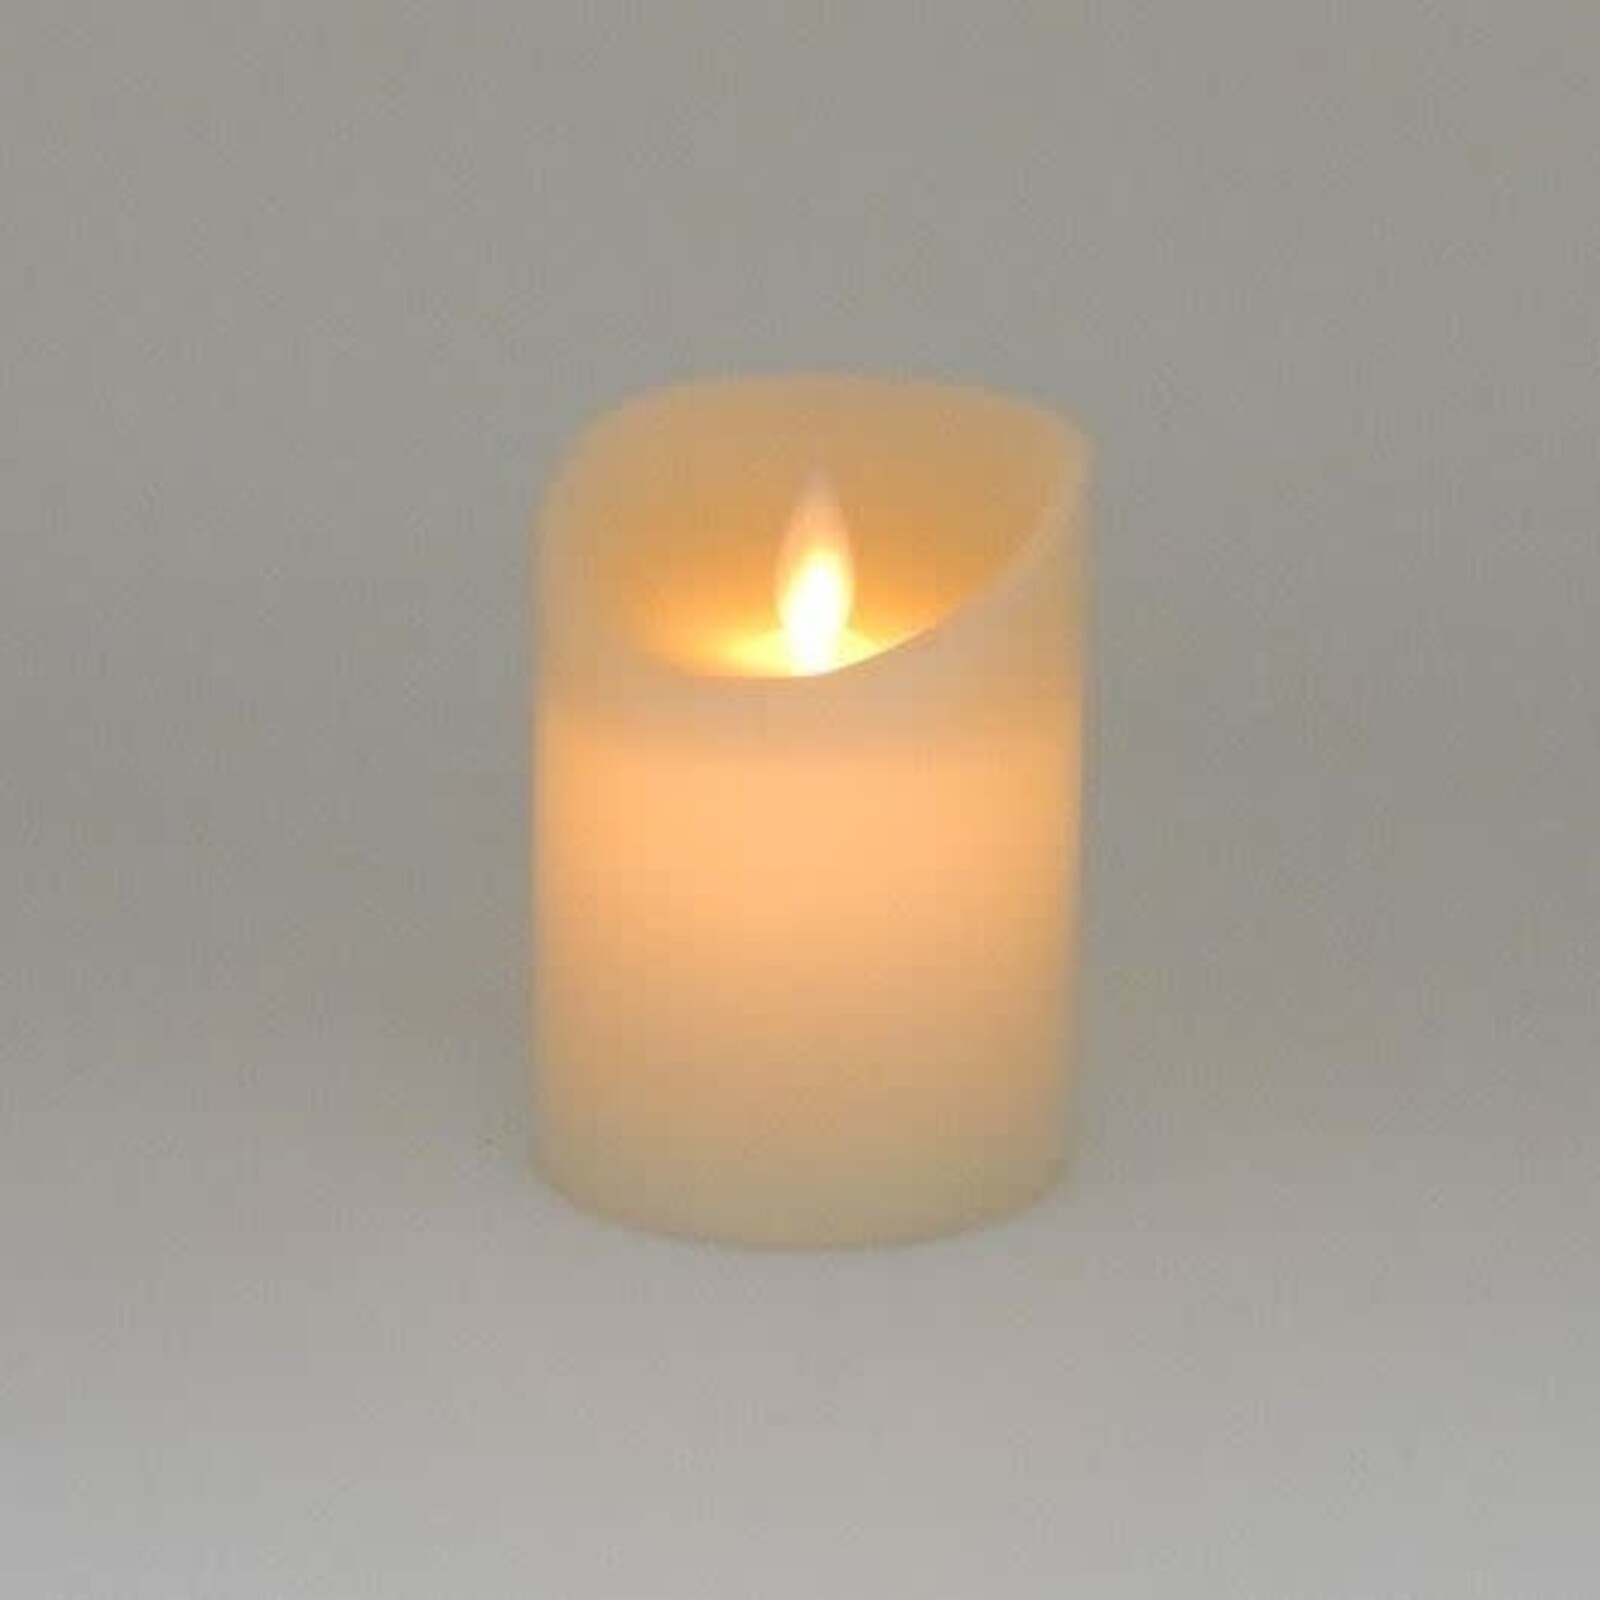 Green Pasture 3 1/2" X 5" LED Flickering  Candle Cream, 6 hours timer LE-01W loading=